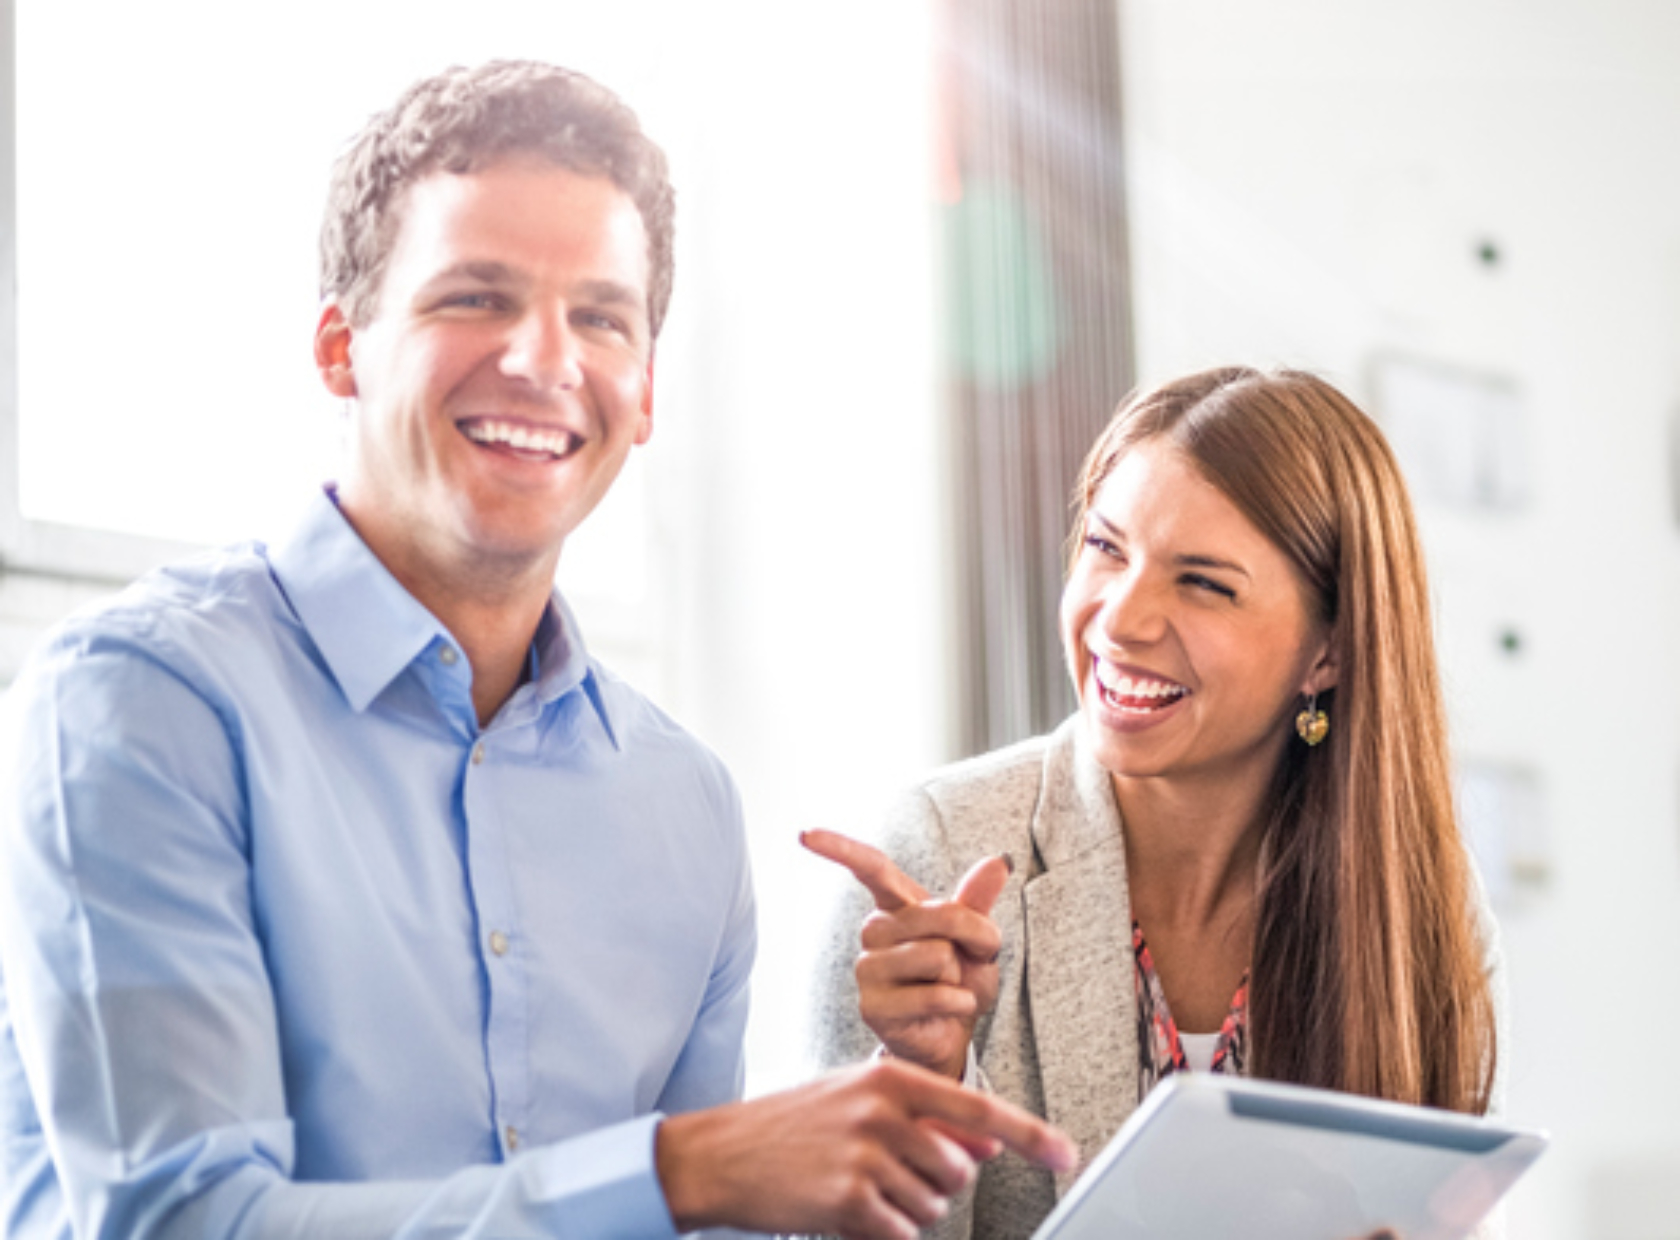 Portrait of cheerful businessman with female colleague using digital tablet in office